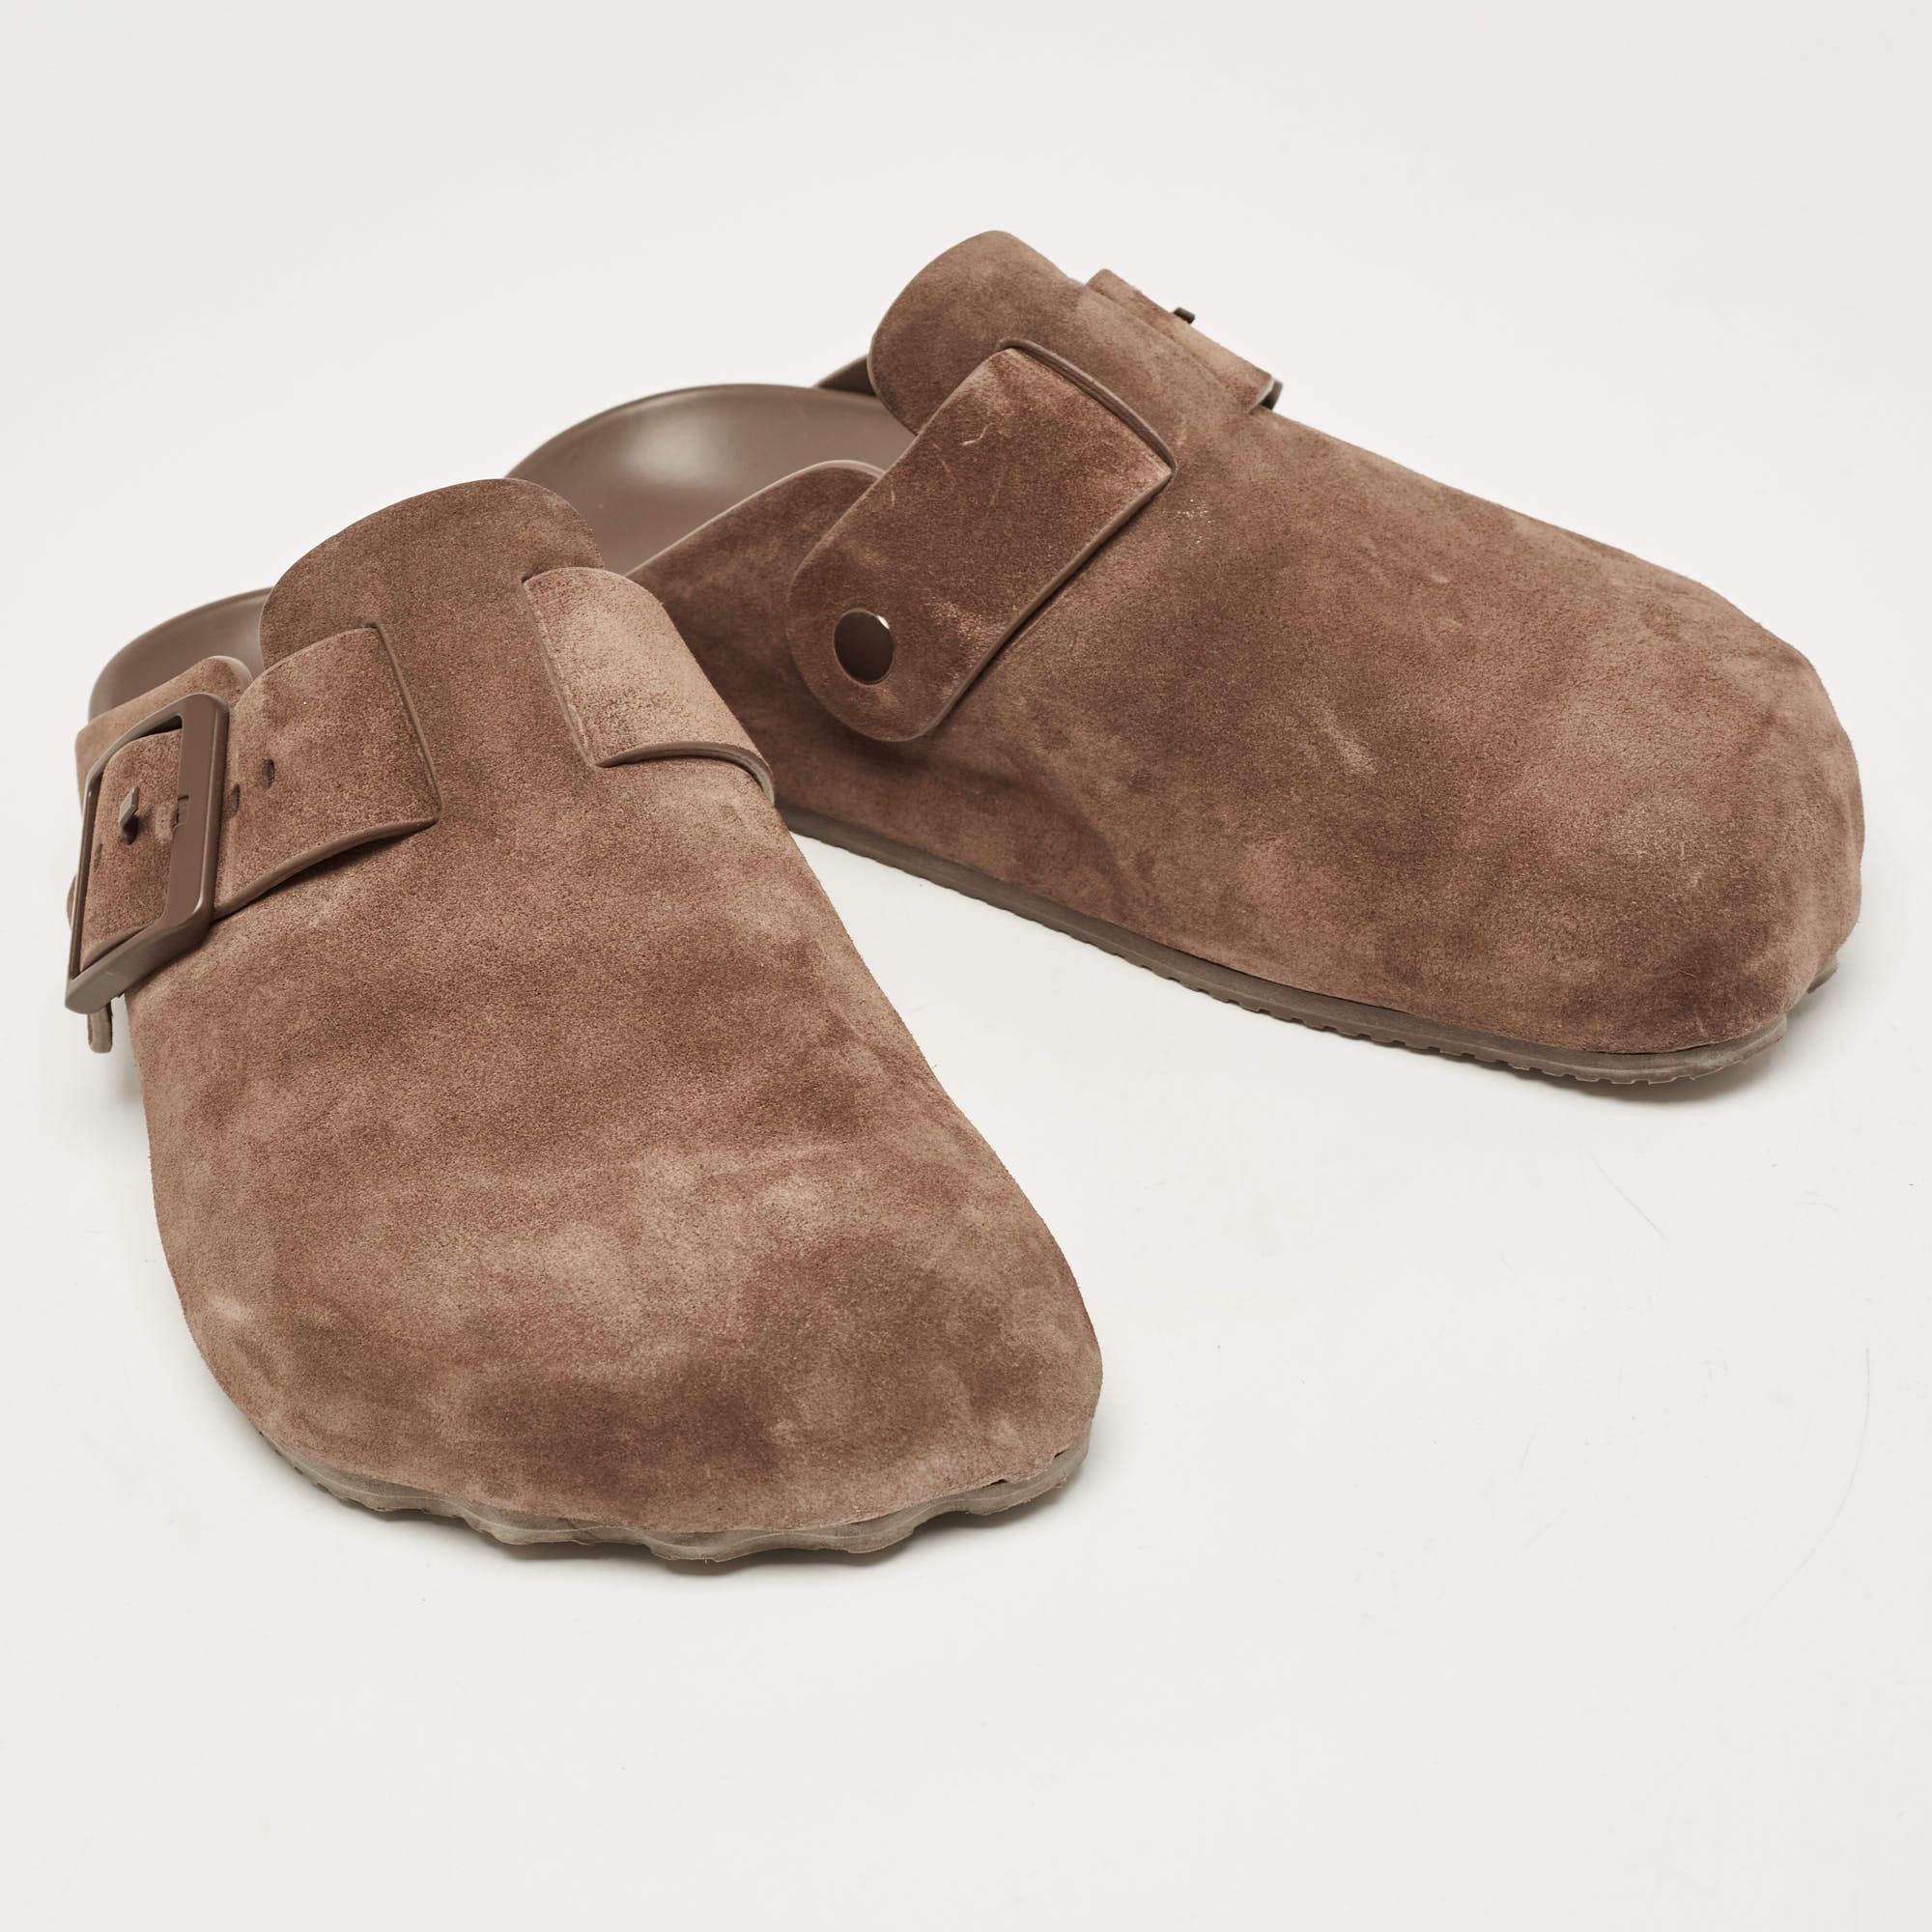 A perfect blend of luxury, style, and comfort, these designer mules are made using quality materials and frame your feet in the most elegant way. They can be paired with a host of outfits from your wardrobe.

Includes: Original Box